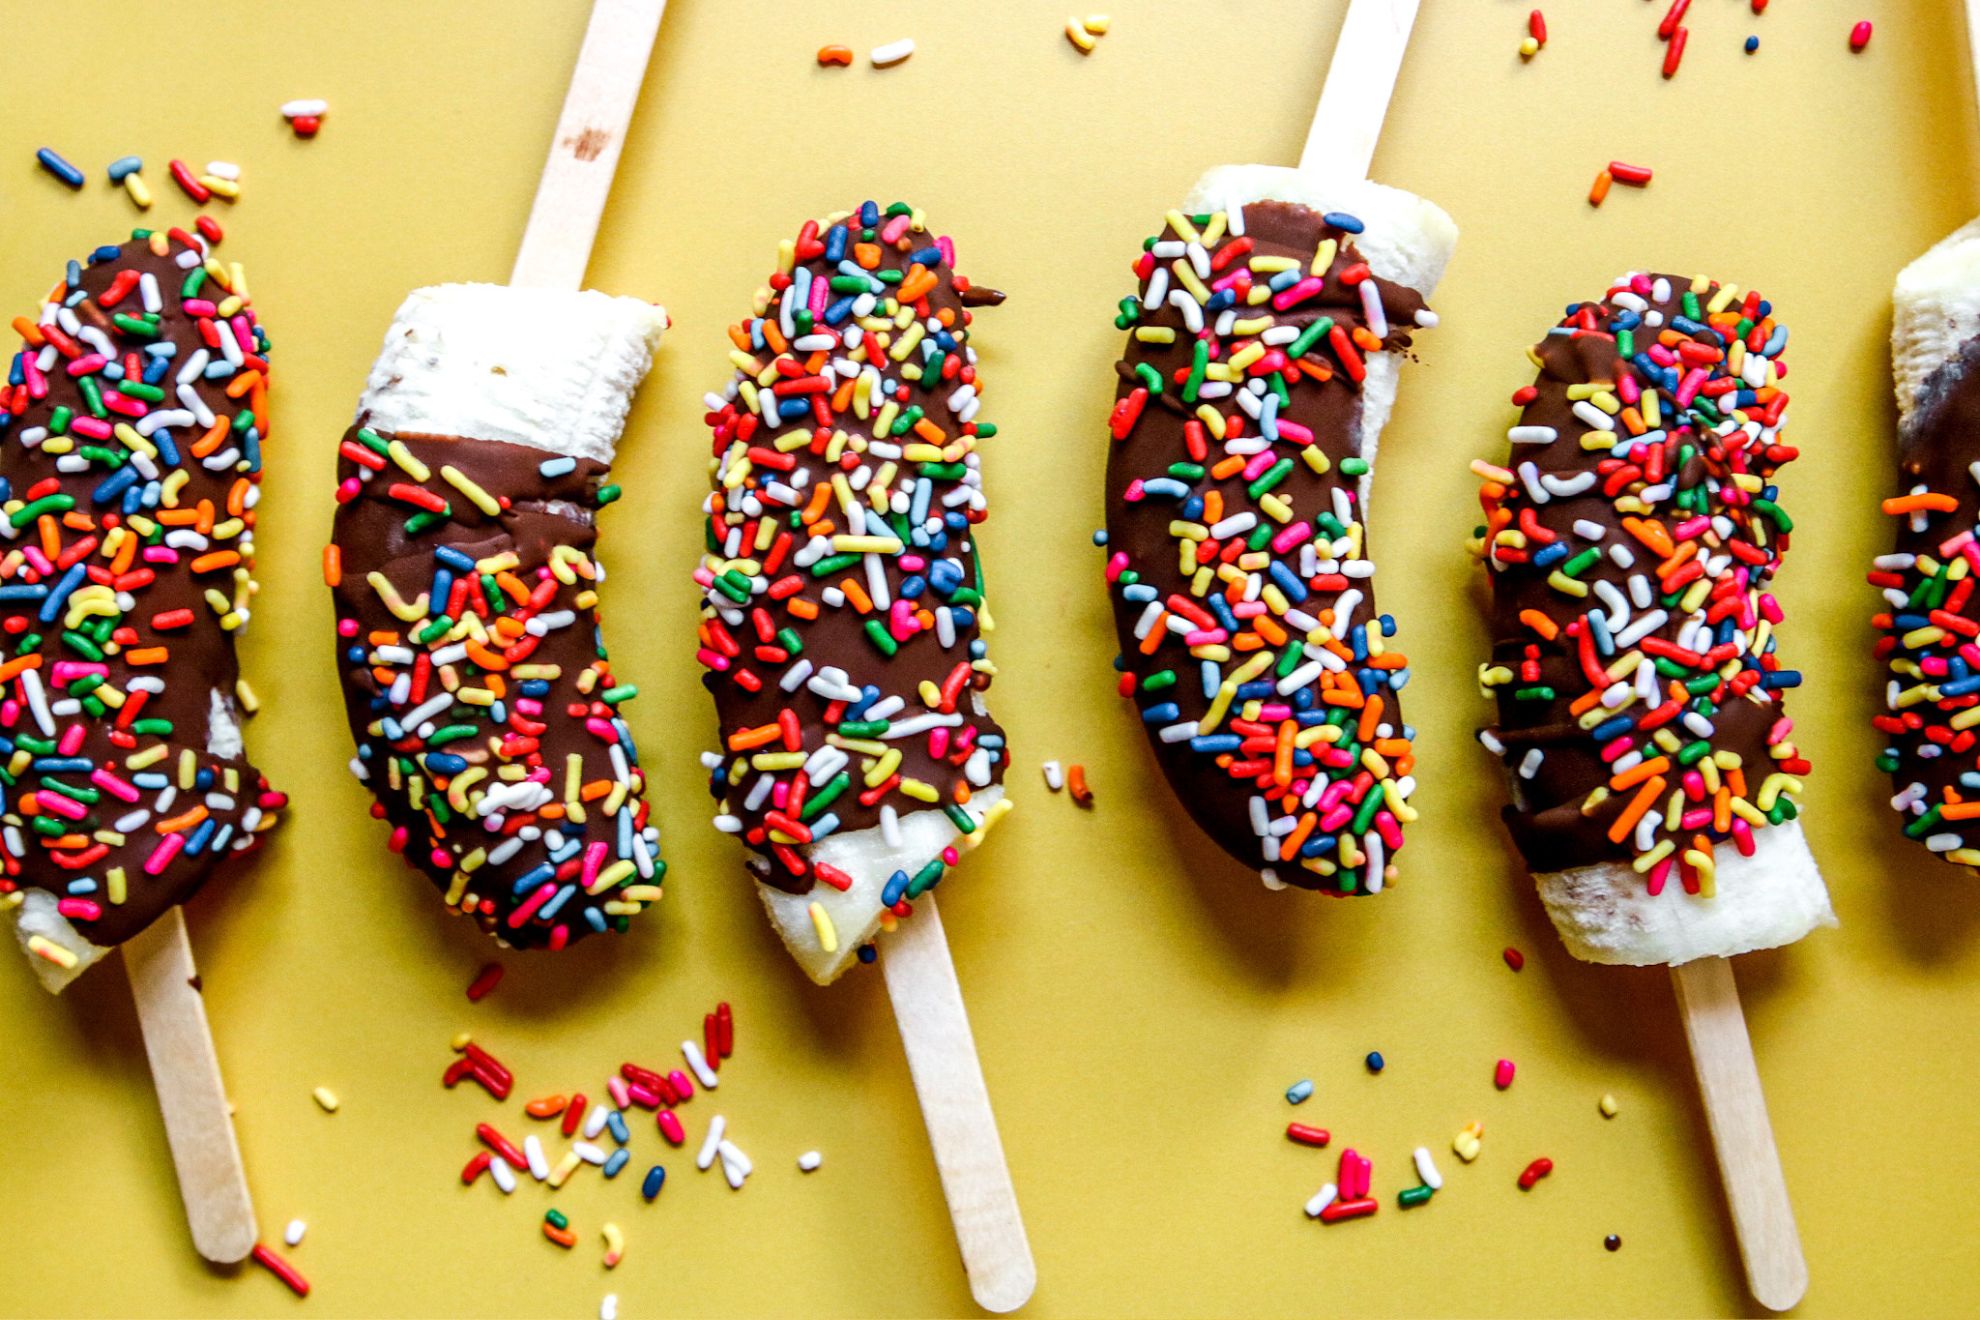 This is a horizontal image of banana halves with popsicle sticks inserted in their bottoms. The banana pops are coated in hardened chocolate and sprinkled with rainbow sprinkles.